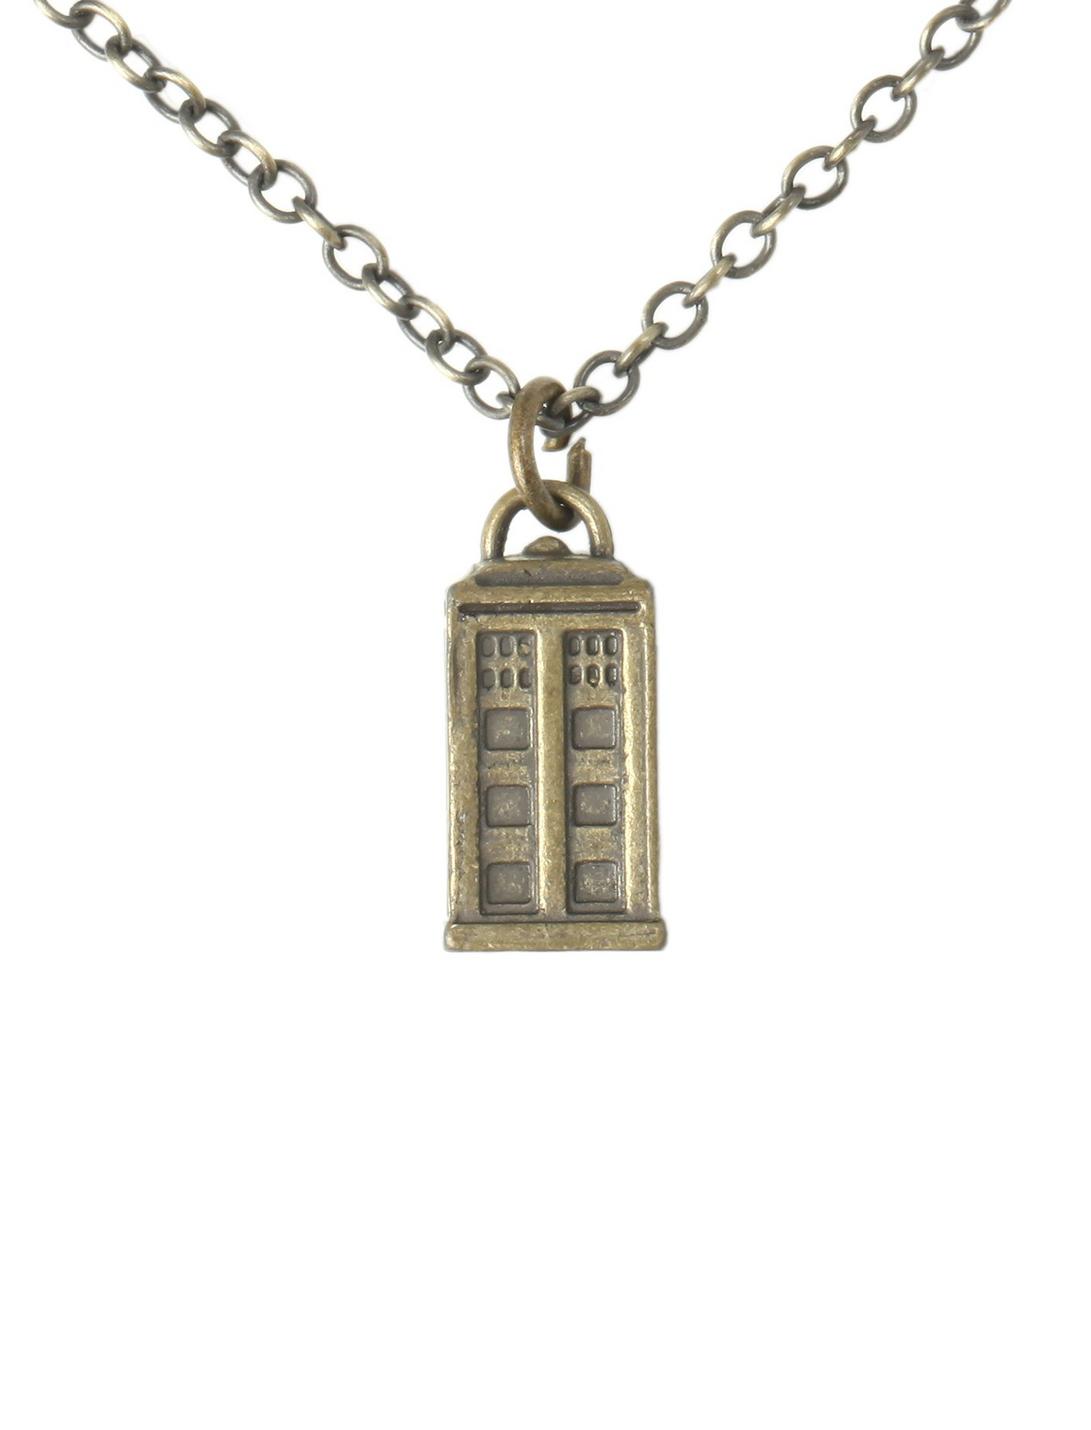 Doctor Who TARDIS Charm Necklace, , hi-res